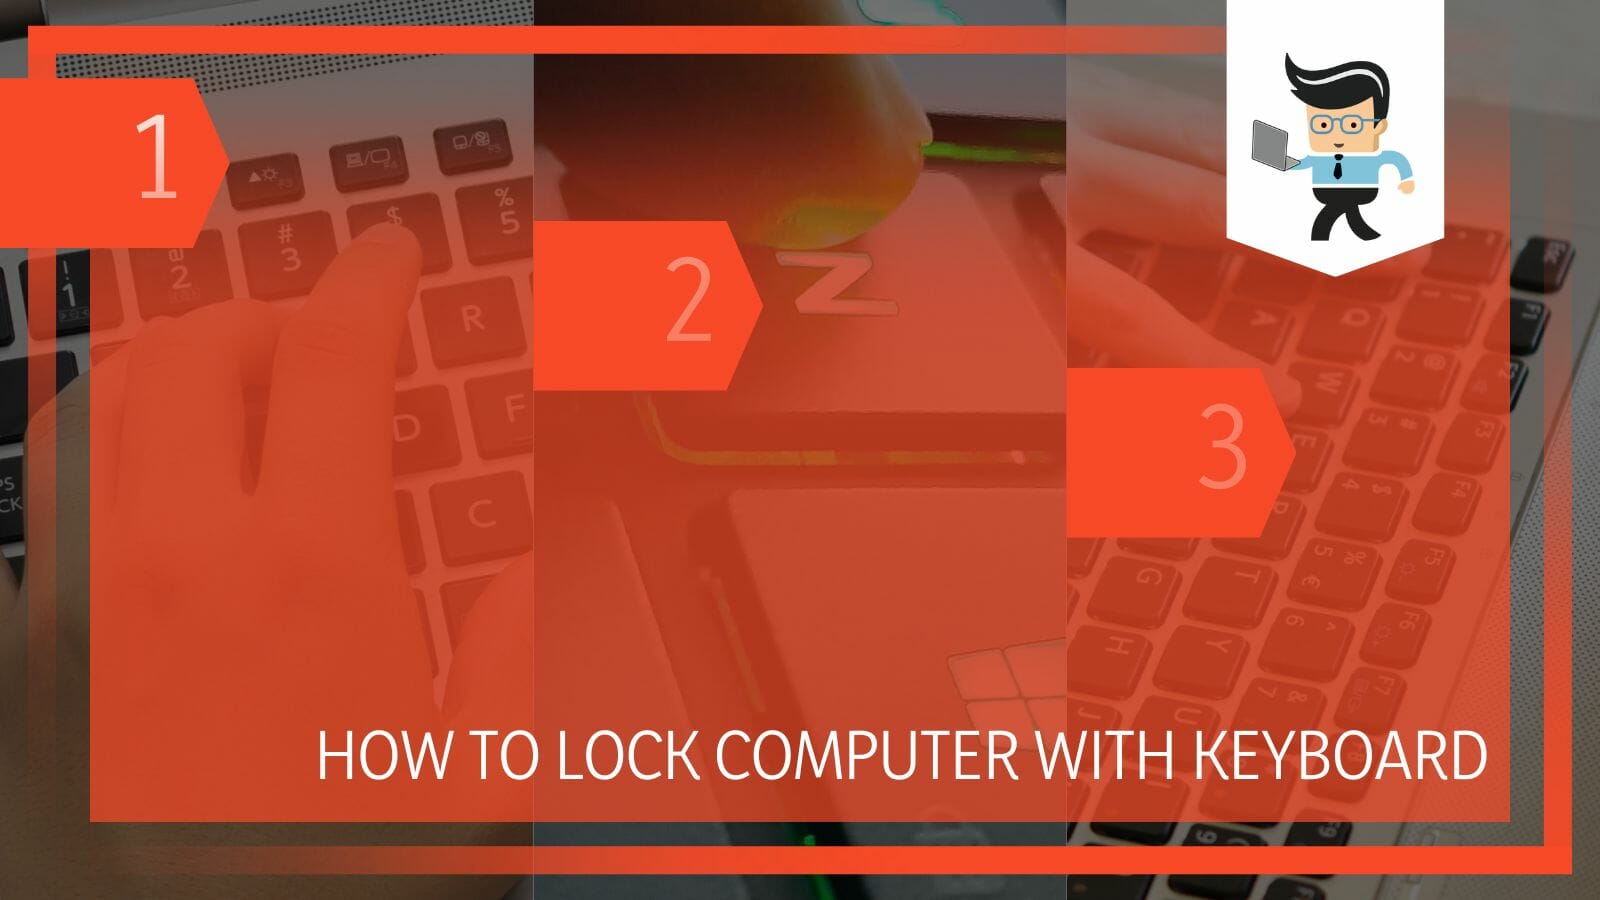 How to Lock Computer With Keyboard